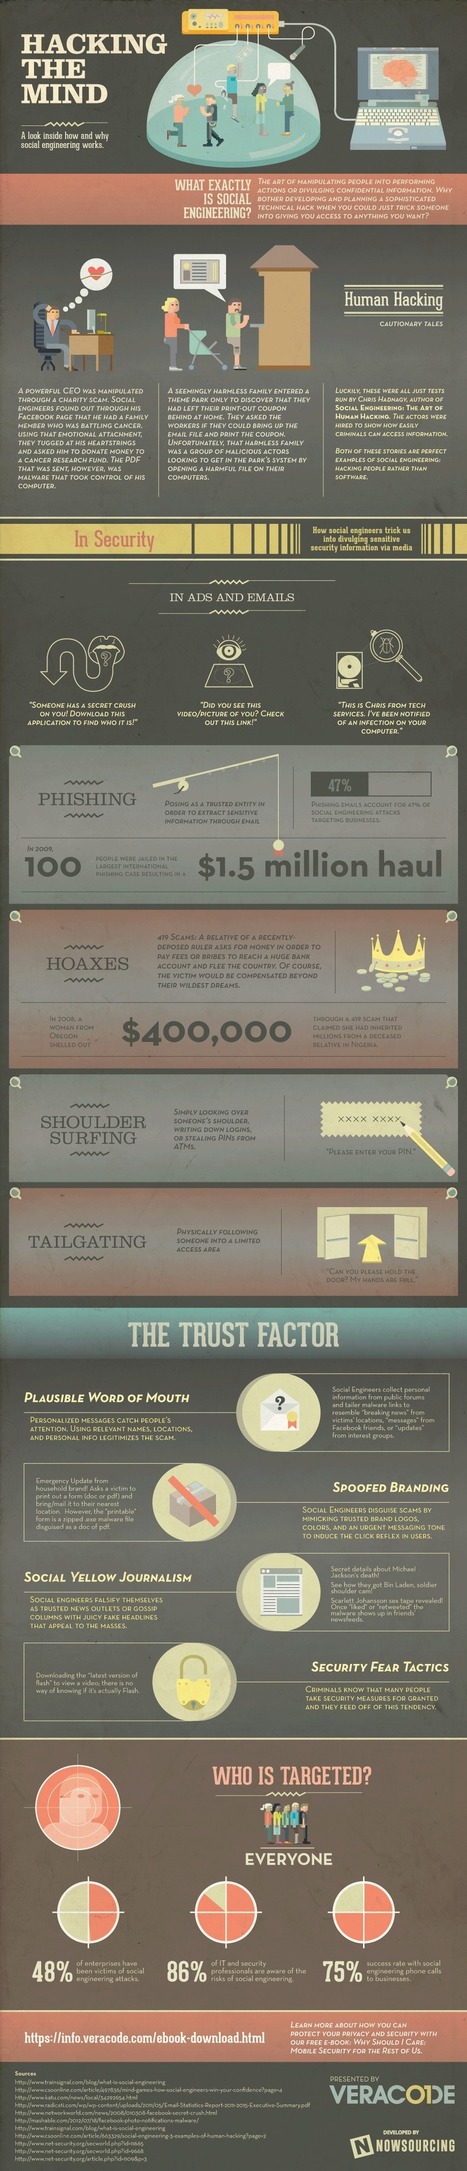 How and Why Social Engineering Works [Infographic] | Digital Collaboration and the 21st C. | Scoop.it